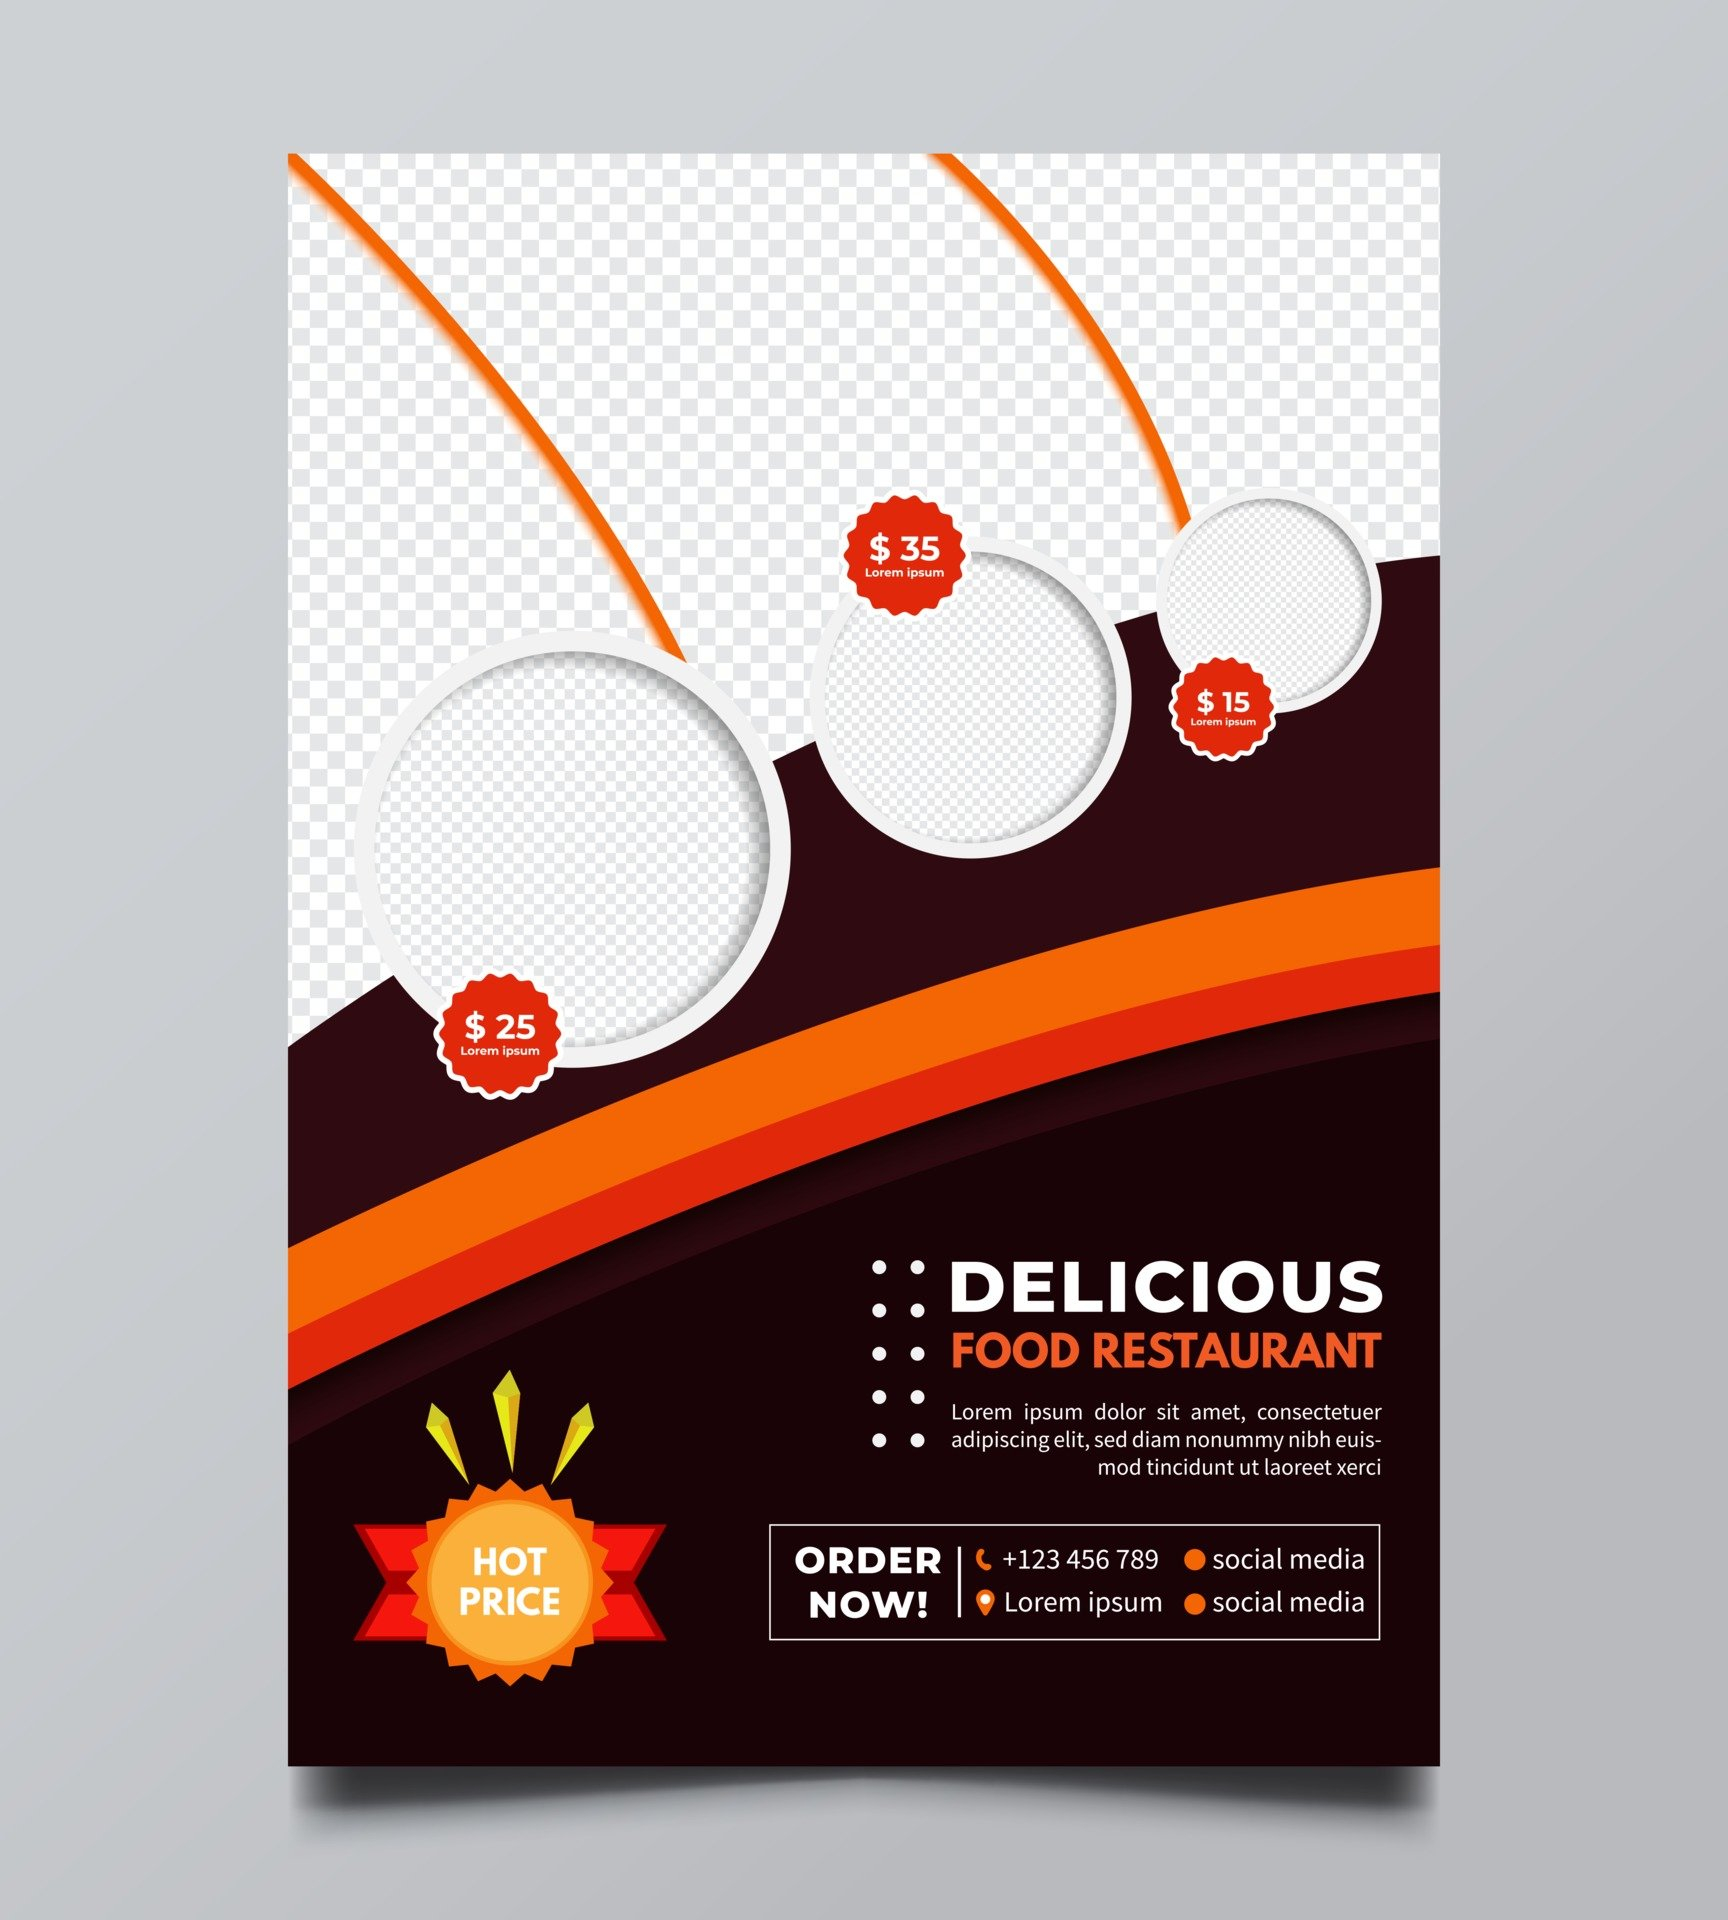 Food Sale promotion flyer and poster template 10 Vector Art  Regarding Food Sale Flyer Template Regarding Food Sale Flyer Template